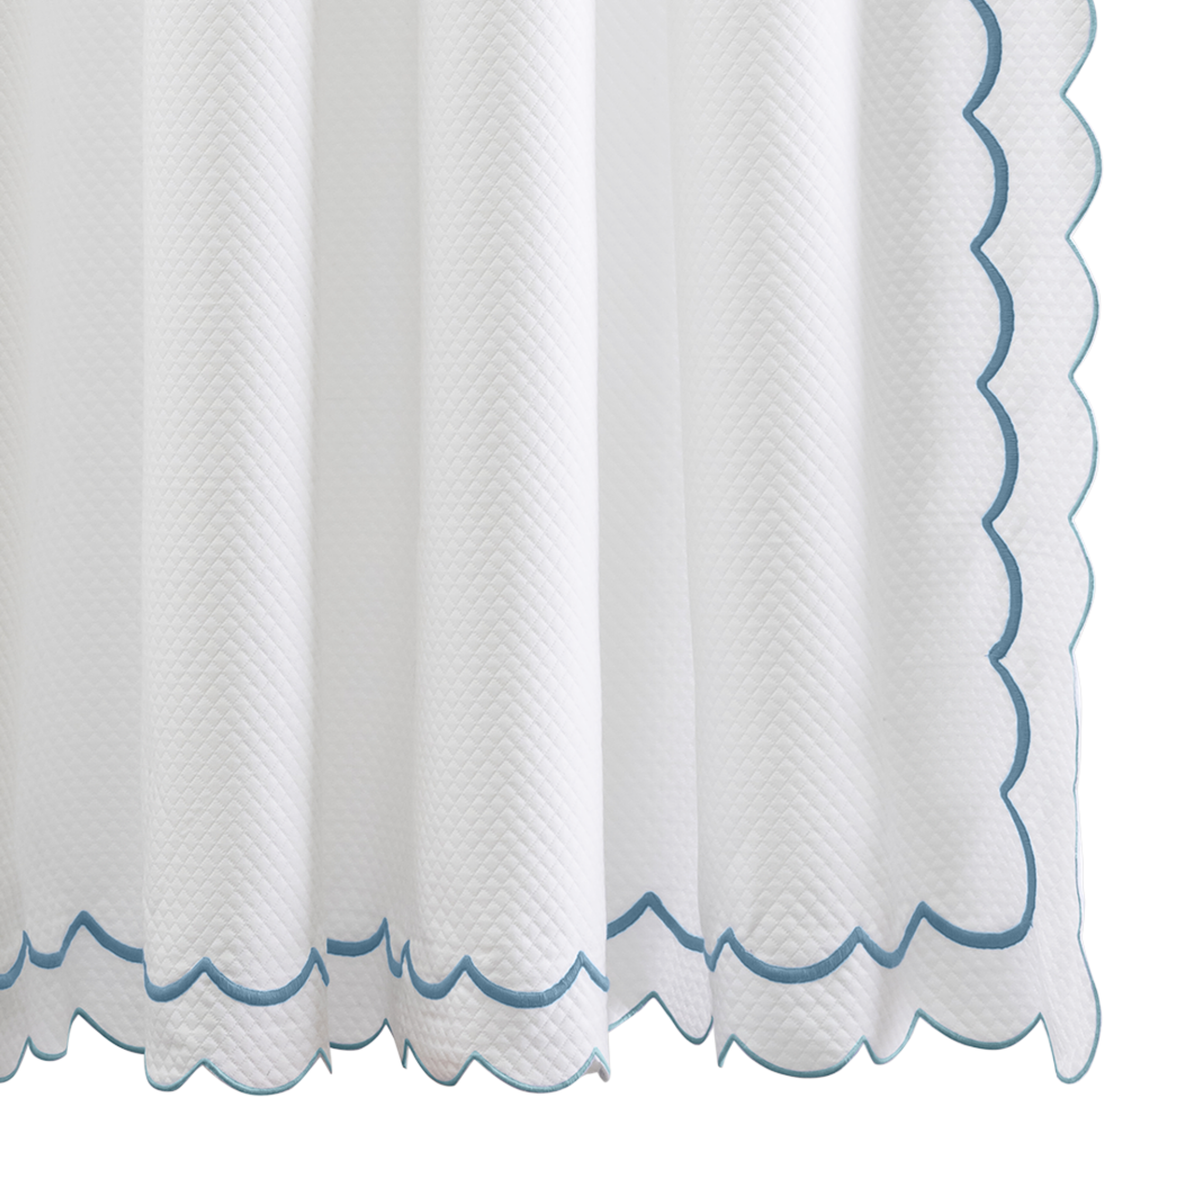 Hanging Edges of Matouk Indie Pique Shower Curtain in Cerulean Color